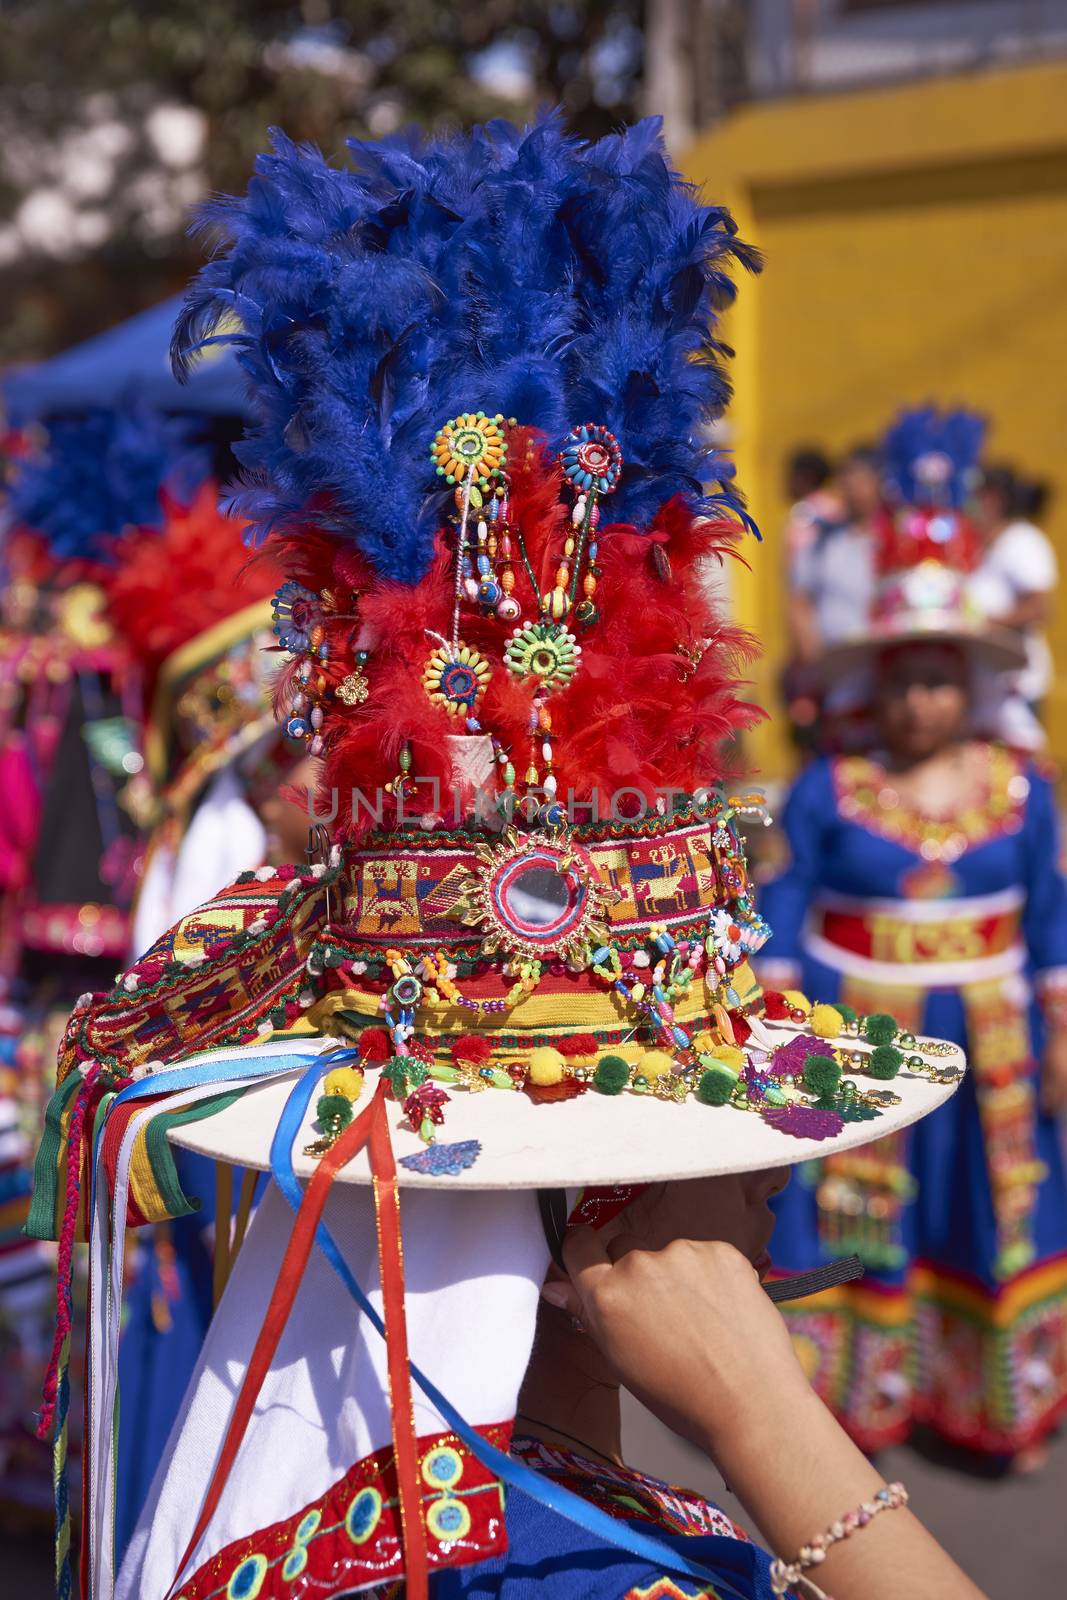 Detail of the ornate hat worn by a member of a Tinku group performing a traditional ritual dance as part of the Carnaval Andino con la Fuerza del Sol in Arica, Chile.